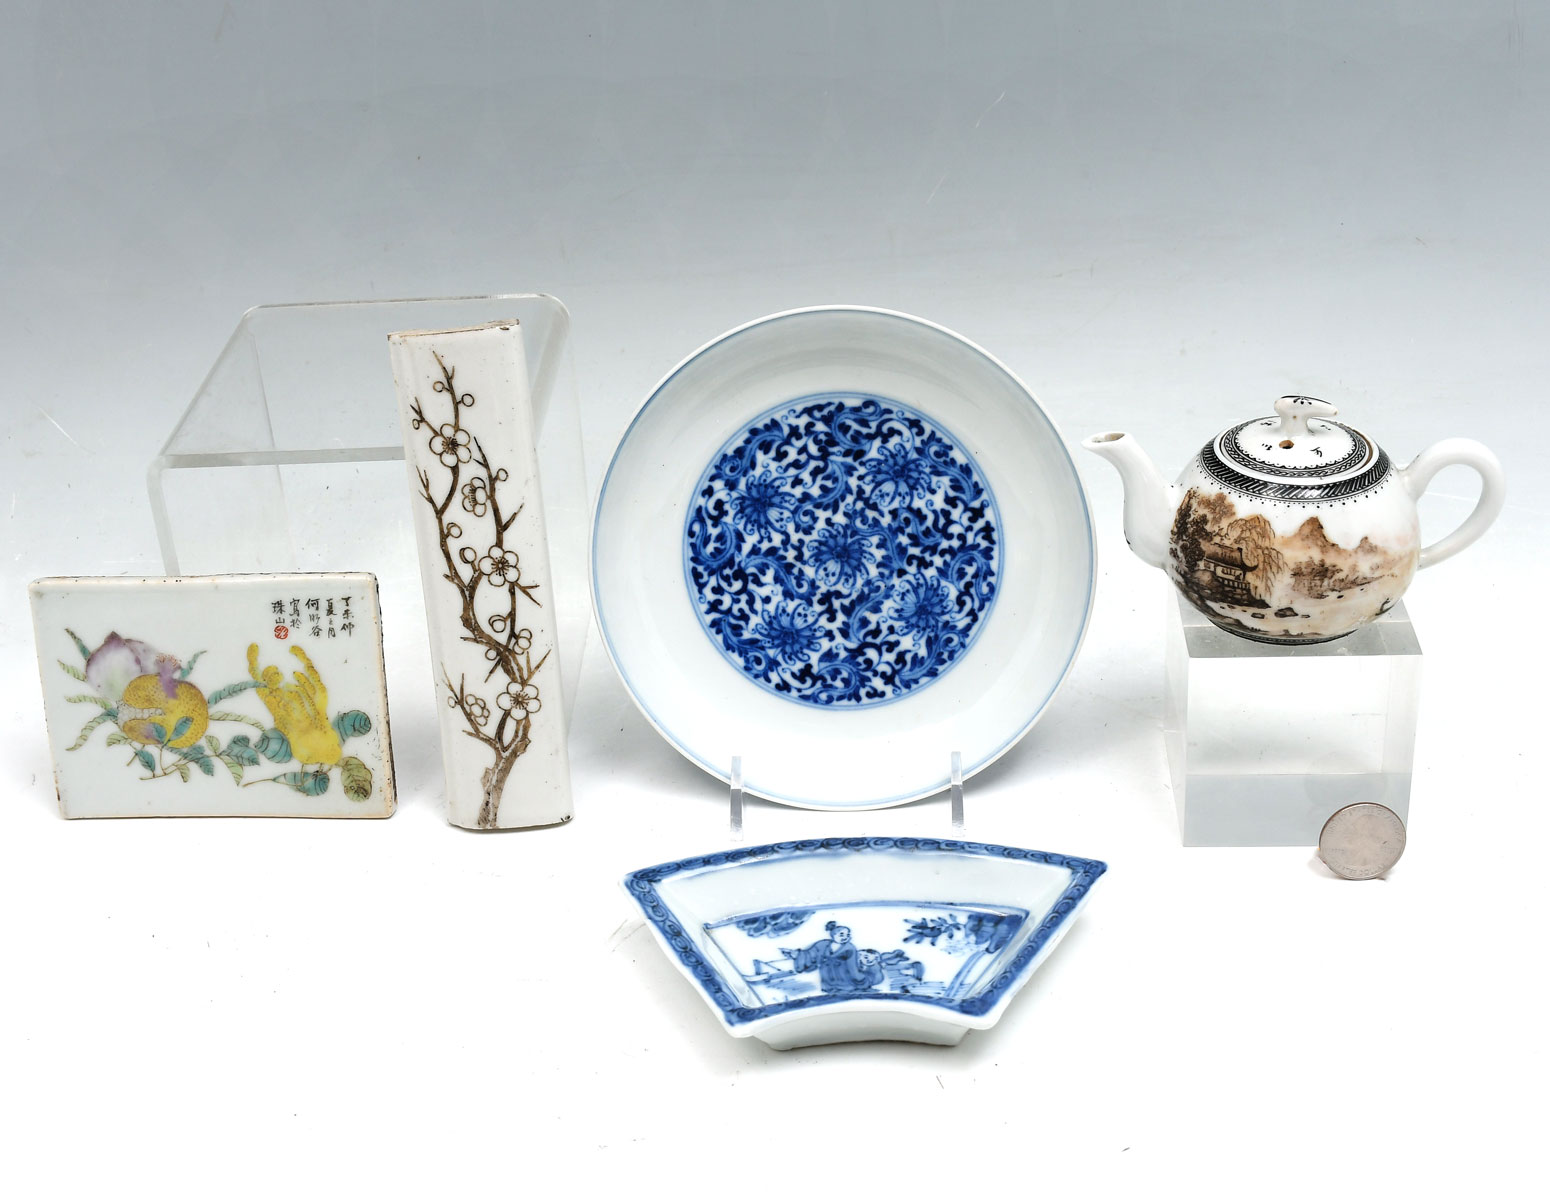 5 PIECE CHINESE PORCELAIN COLLECTION: